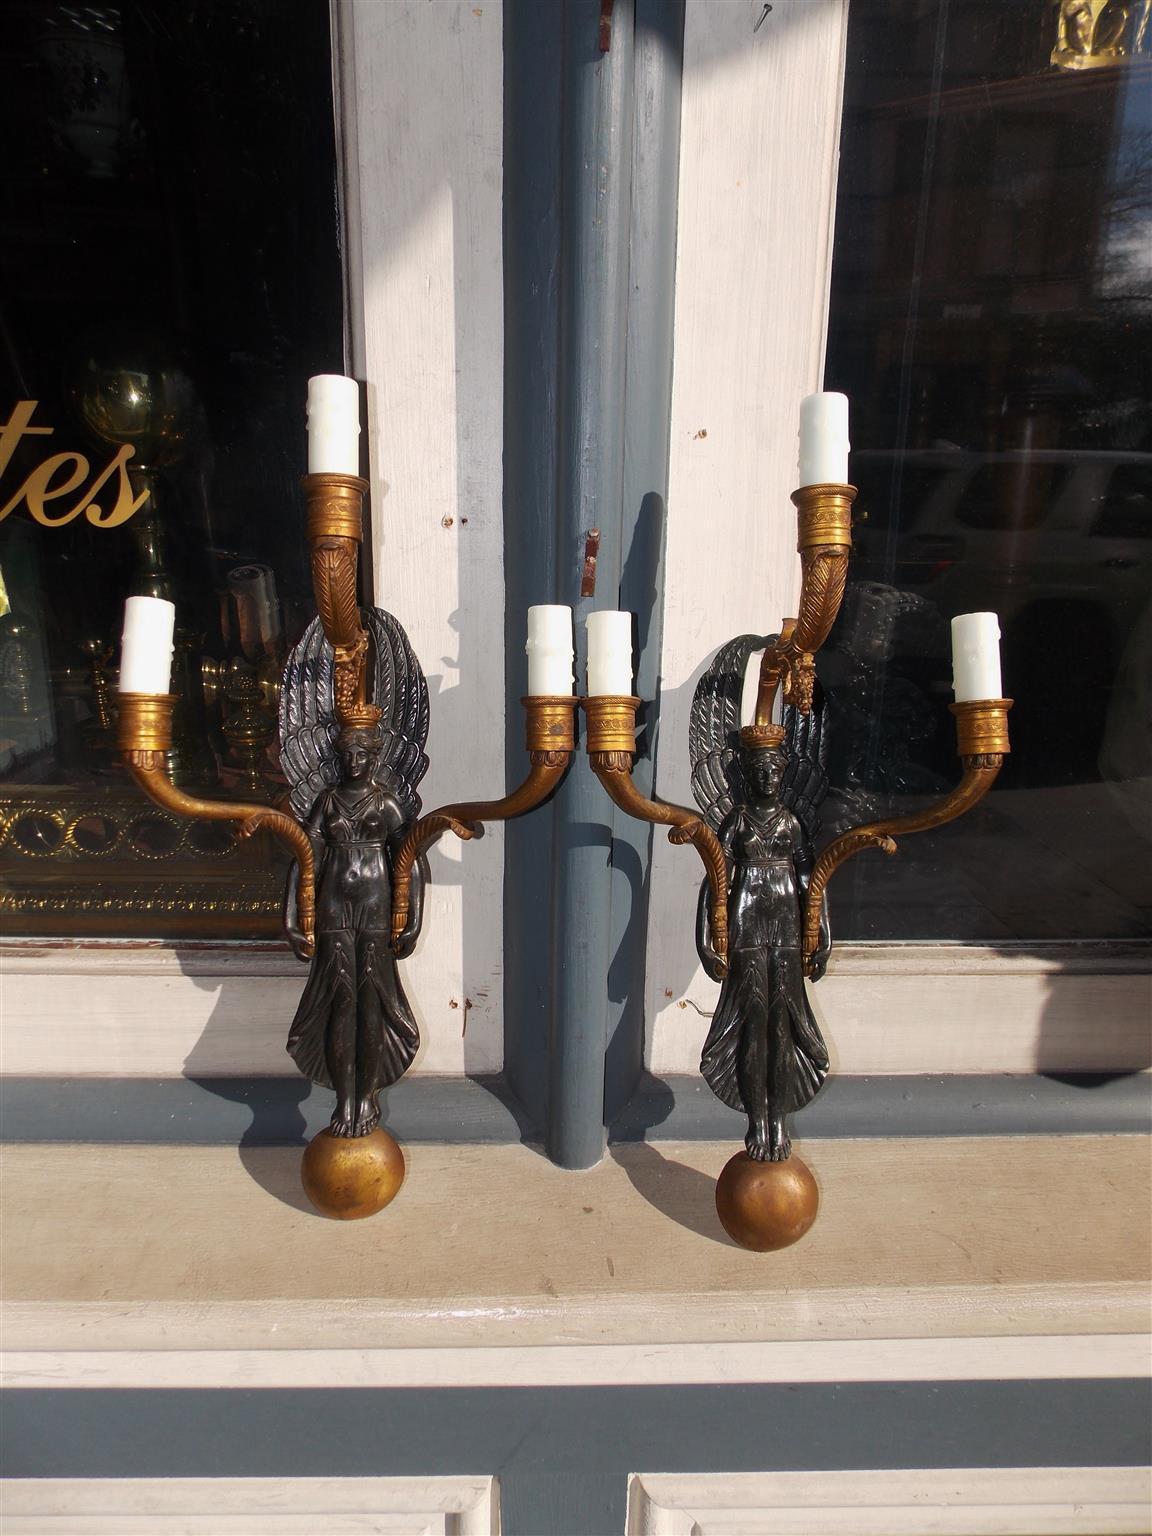 Pair of American Empire figural gilt bronze three-light sconces. Originally candle powered and have been electrified, Early 19th century.